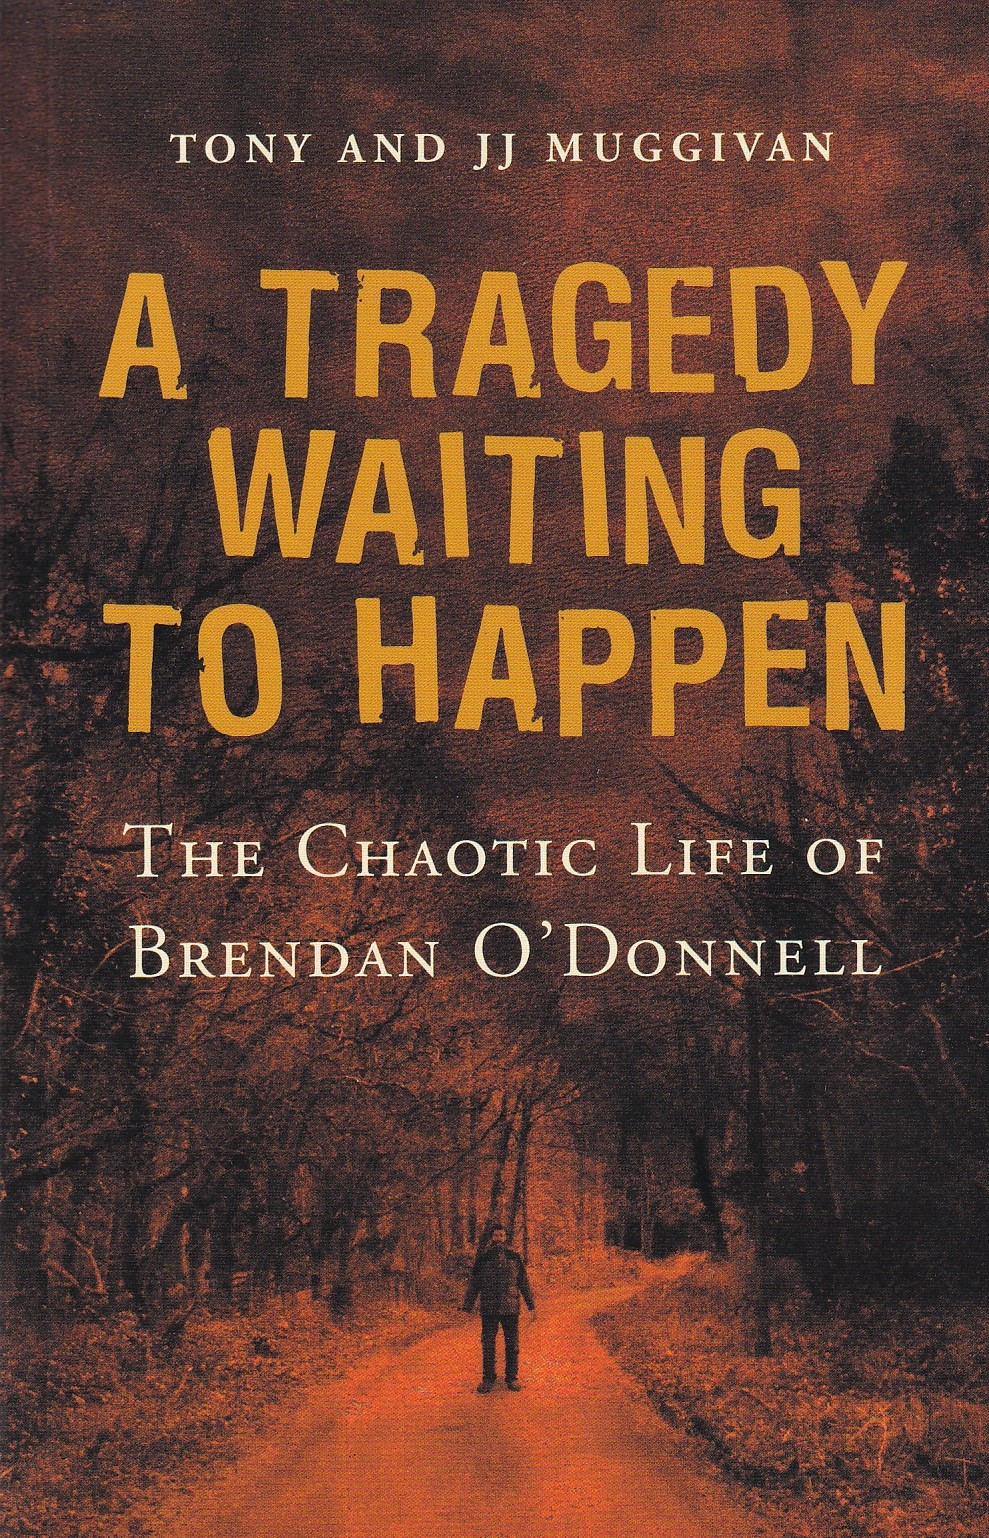 A Tragedy Waiting to Happen: The Chaotic Life of Brendan O’Donnell by Tony and JJ Muggivan